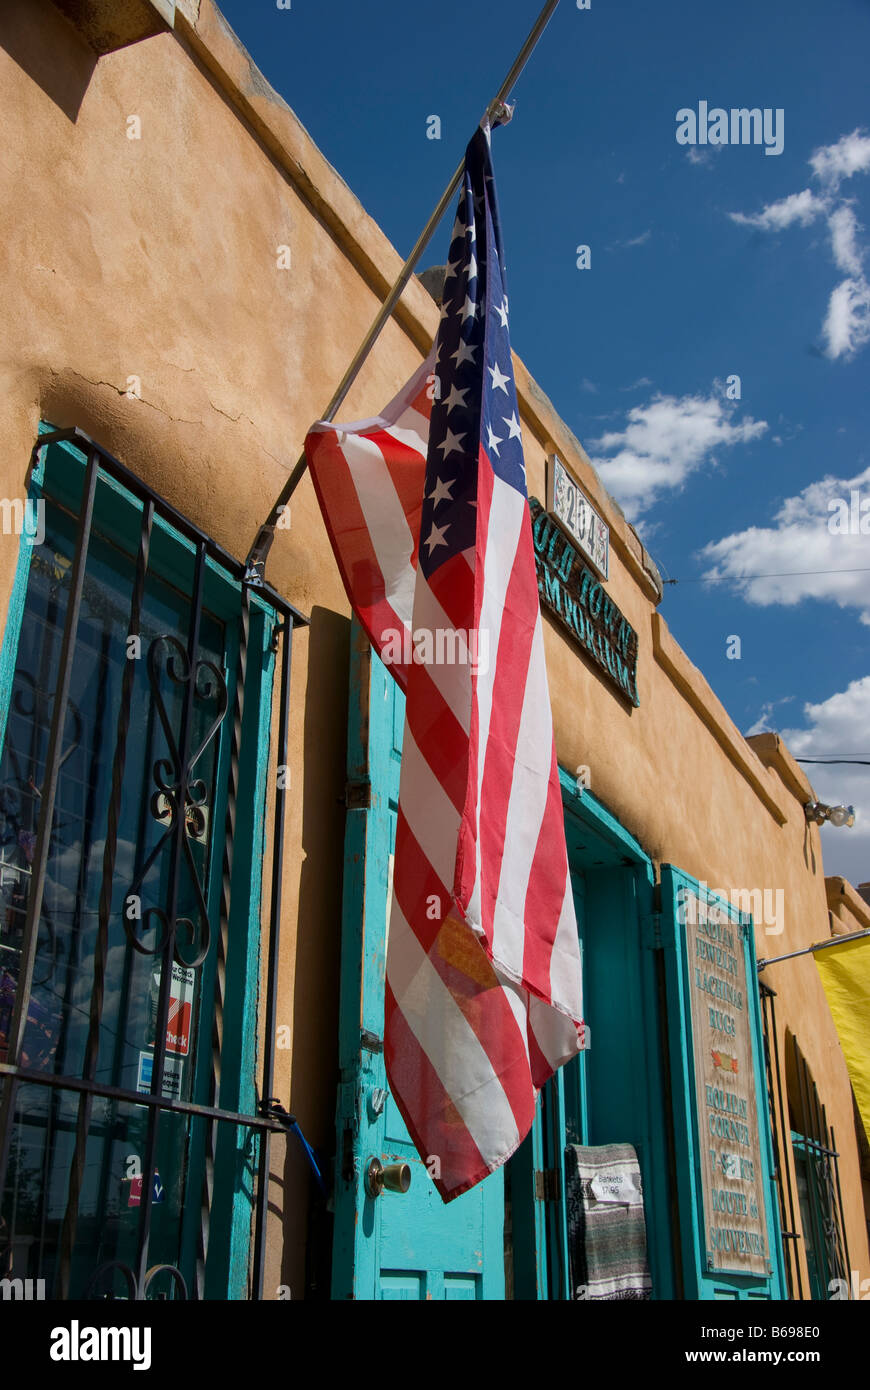 American flag hanging outside the Old Town Emporium in Old Town Albuqueruque Stock Photo